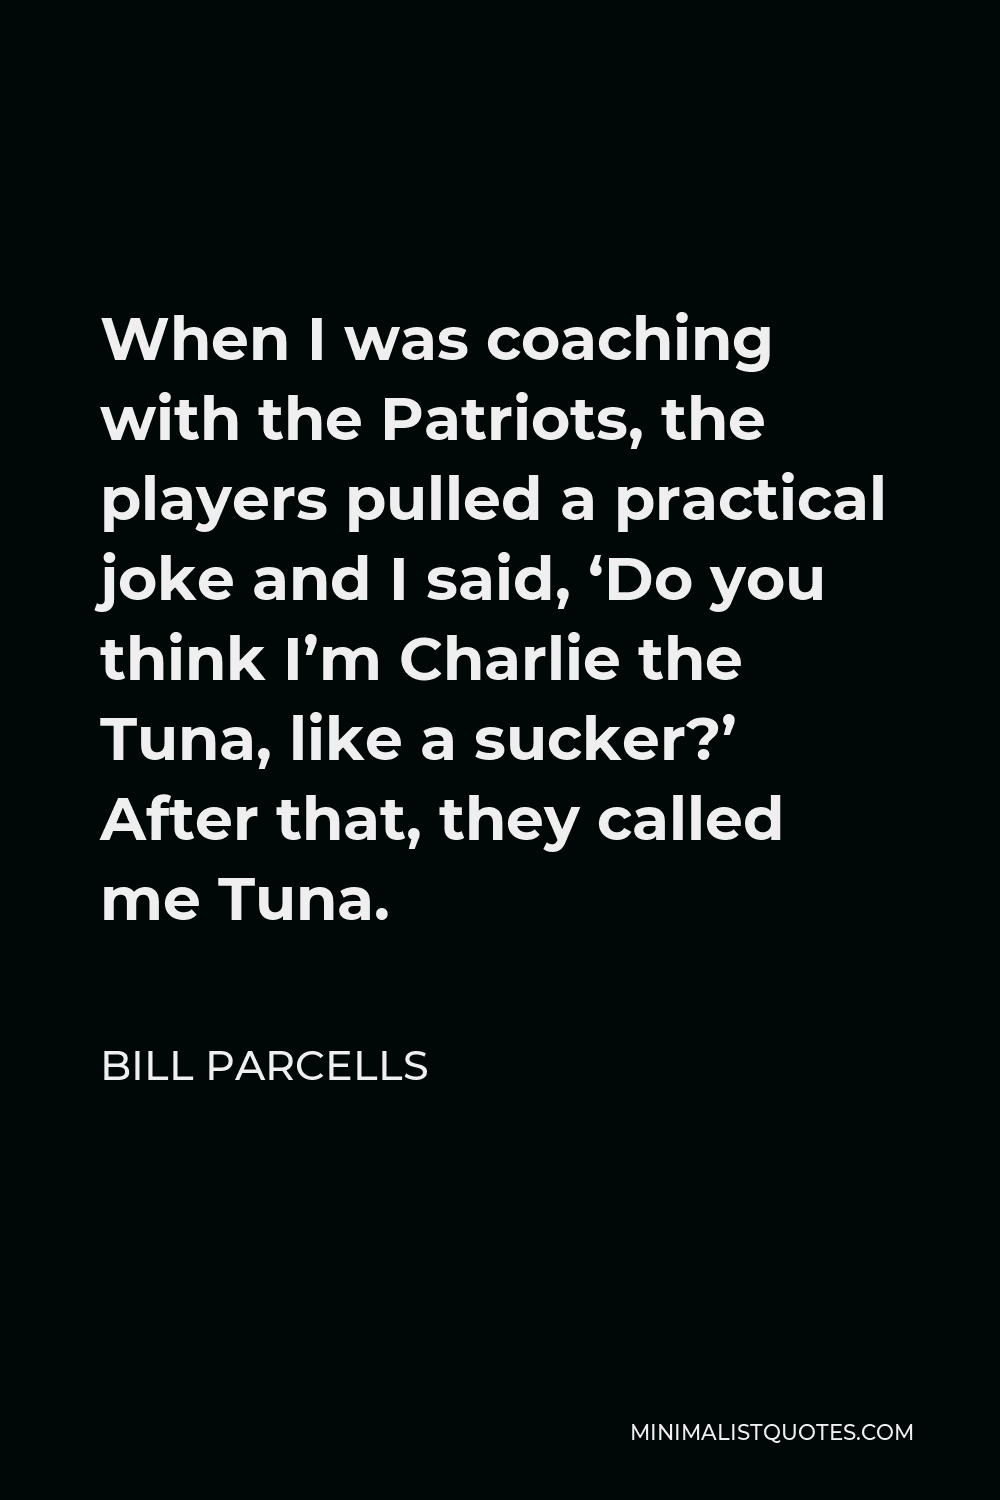 Bill Parcells Quote - When I was coaching with the Patriots, the players pulled a practical joke and I said, ‘Do you think I’m Charlie the Tuna, like a sucker?’ After that, they called me Tuna.